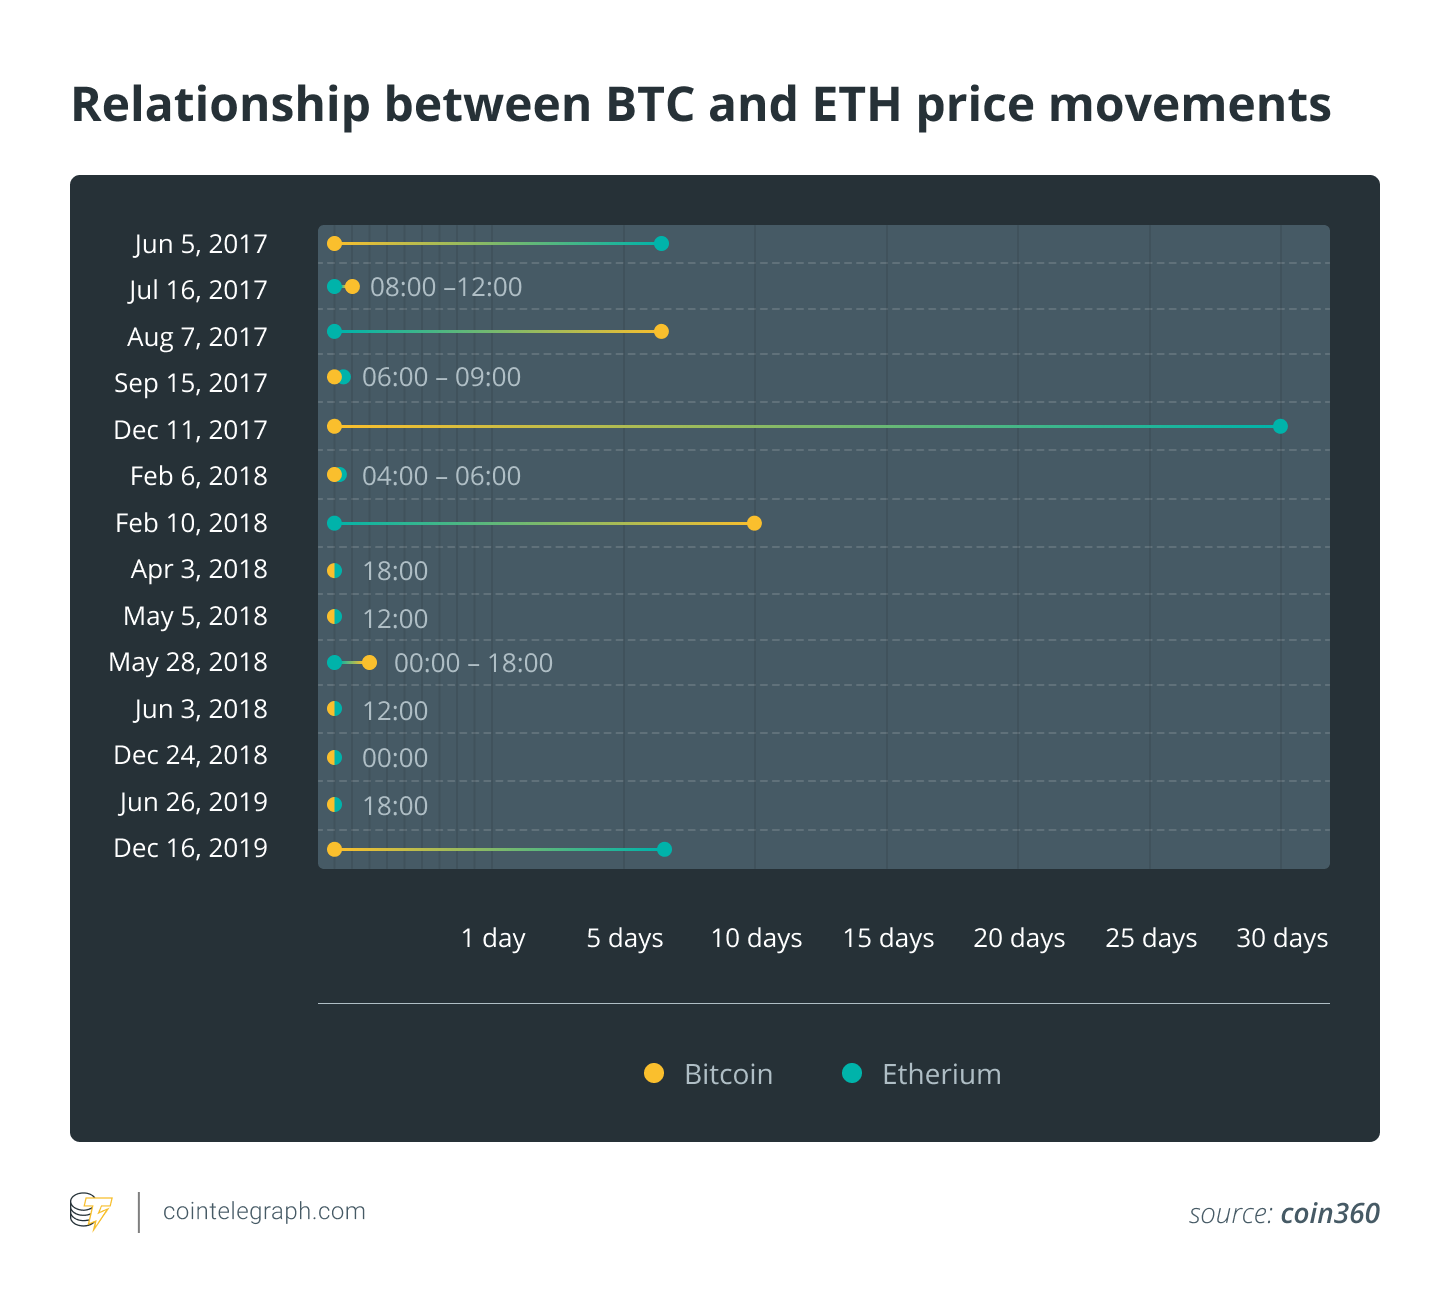 Relationship between BTC and ETH price movements